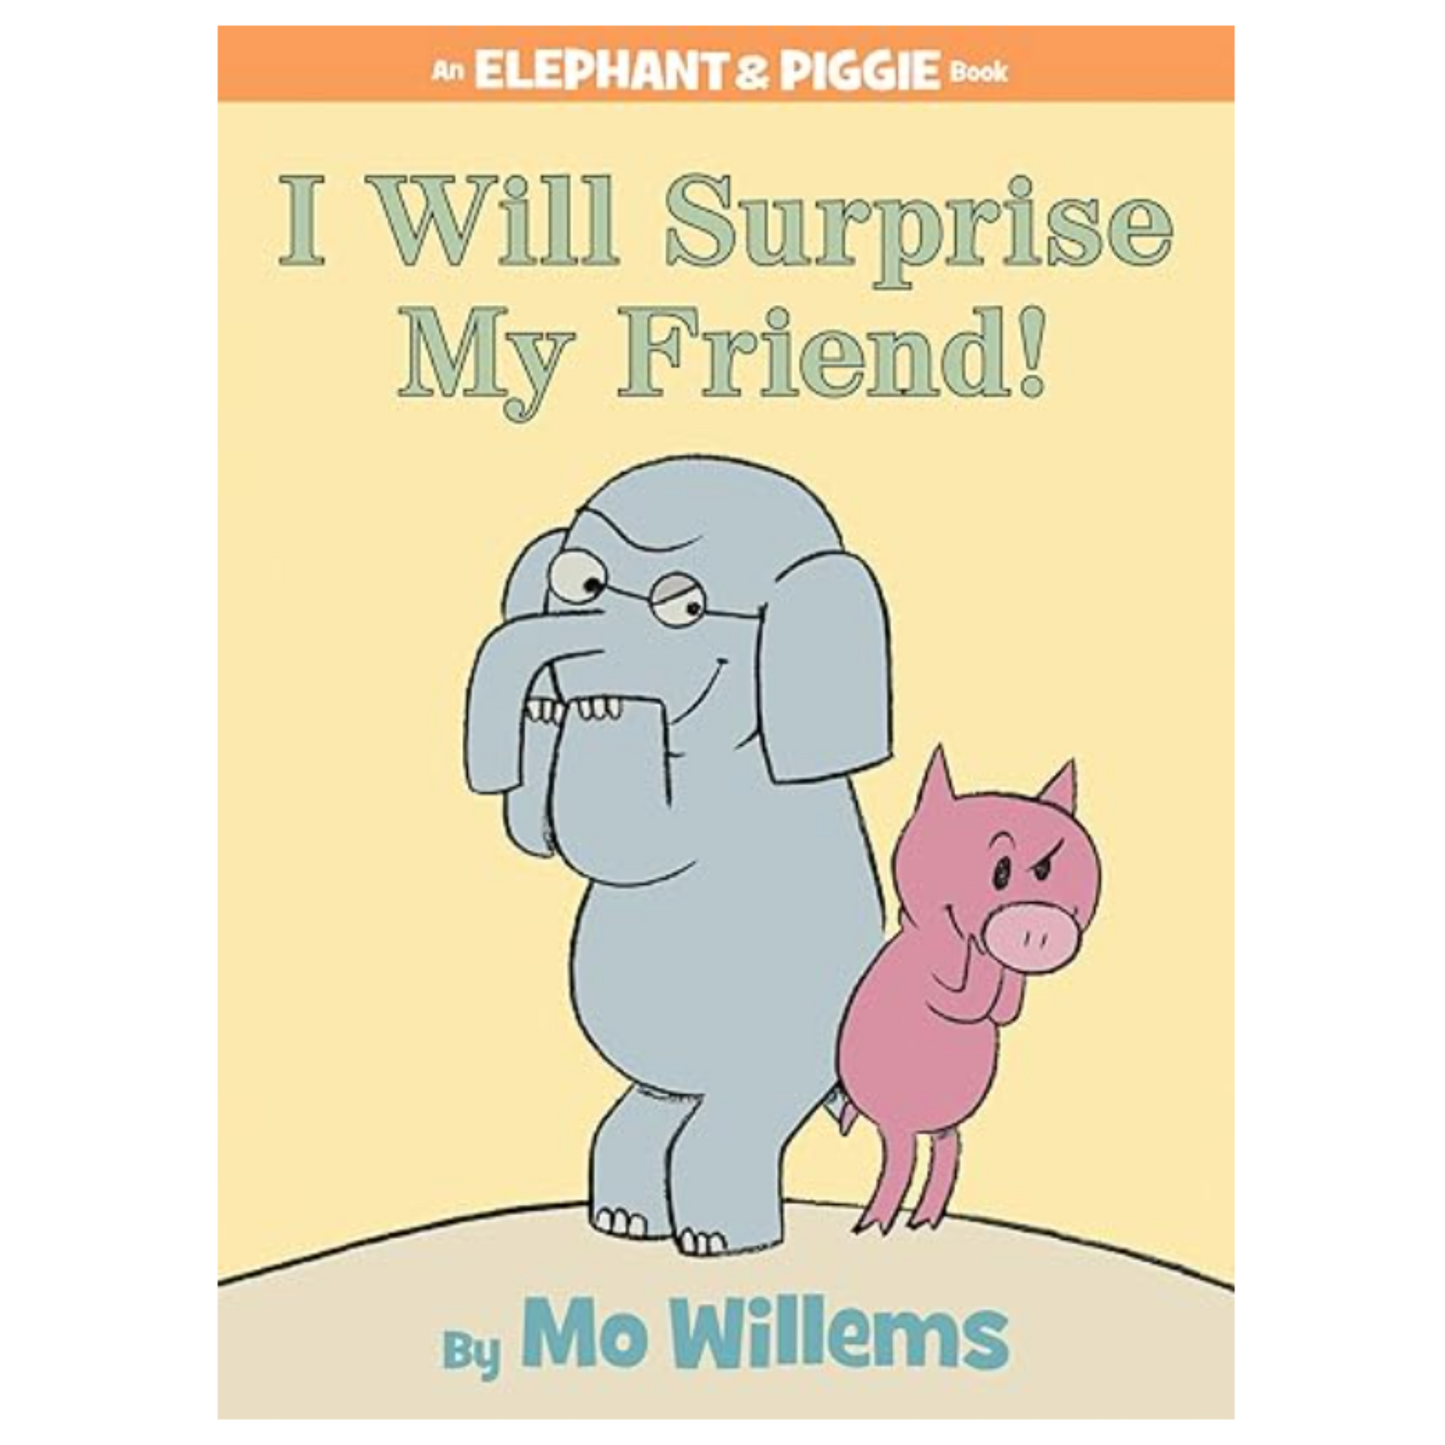 I Will Surprise My Friend!-An Elephant and Piggie Book by Mo Willems (Author) Paperback